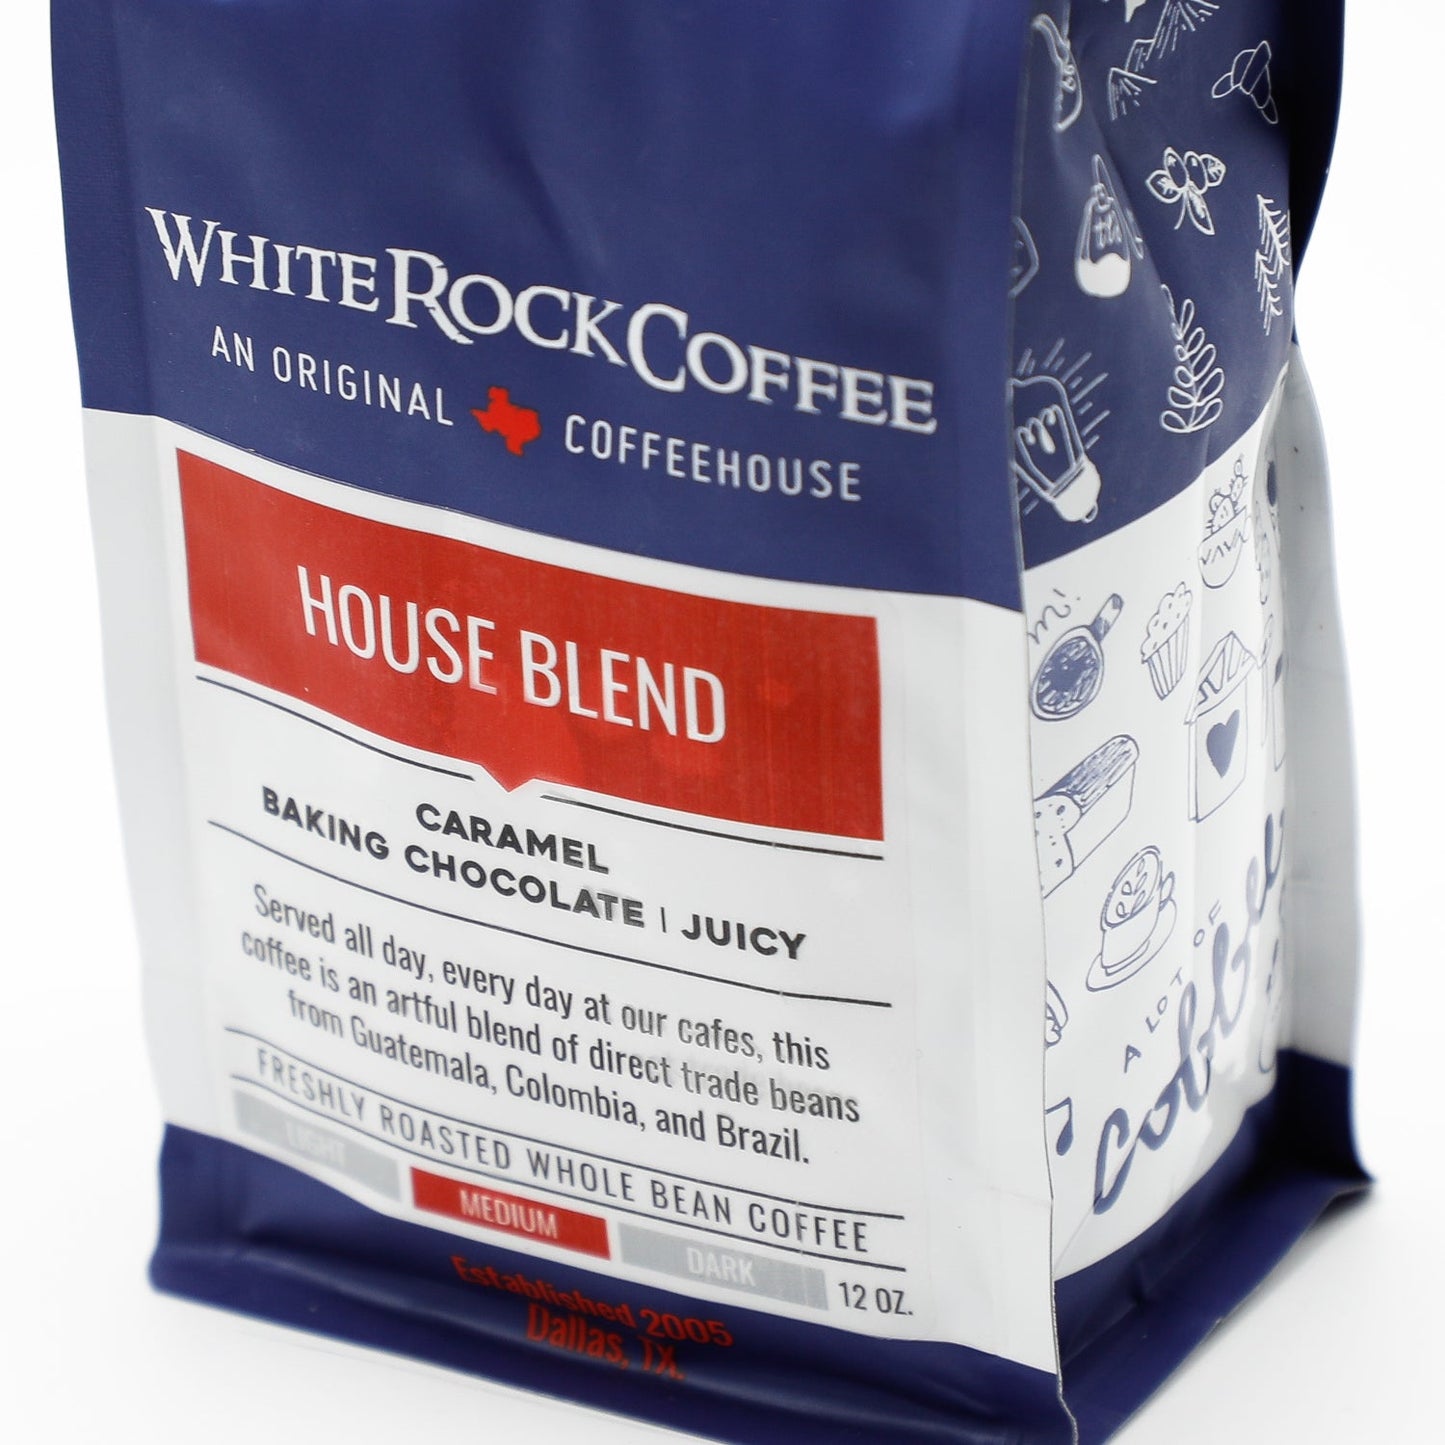 6 Month Coffee Gift Subscription - House Blend - White Rock Coffee